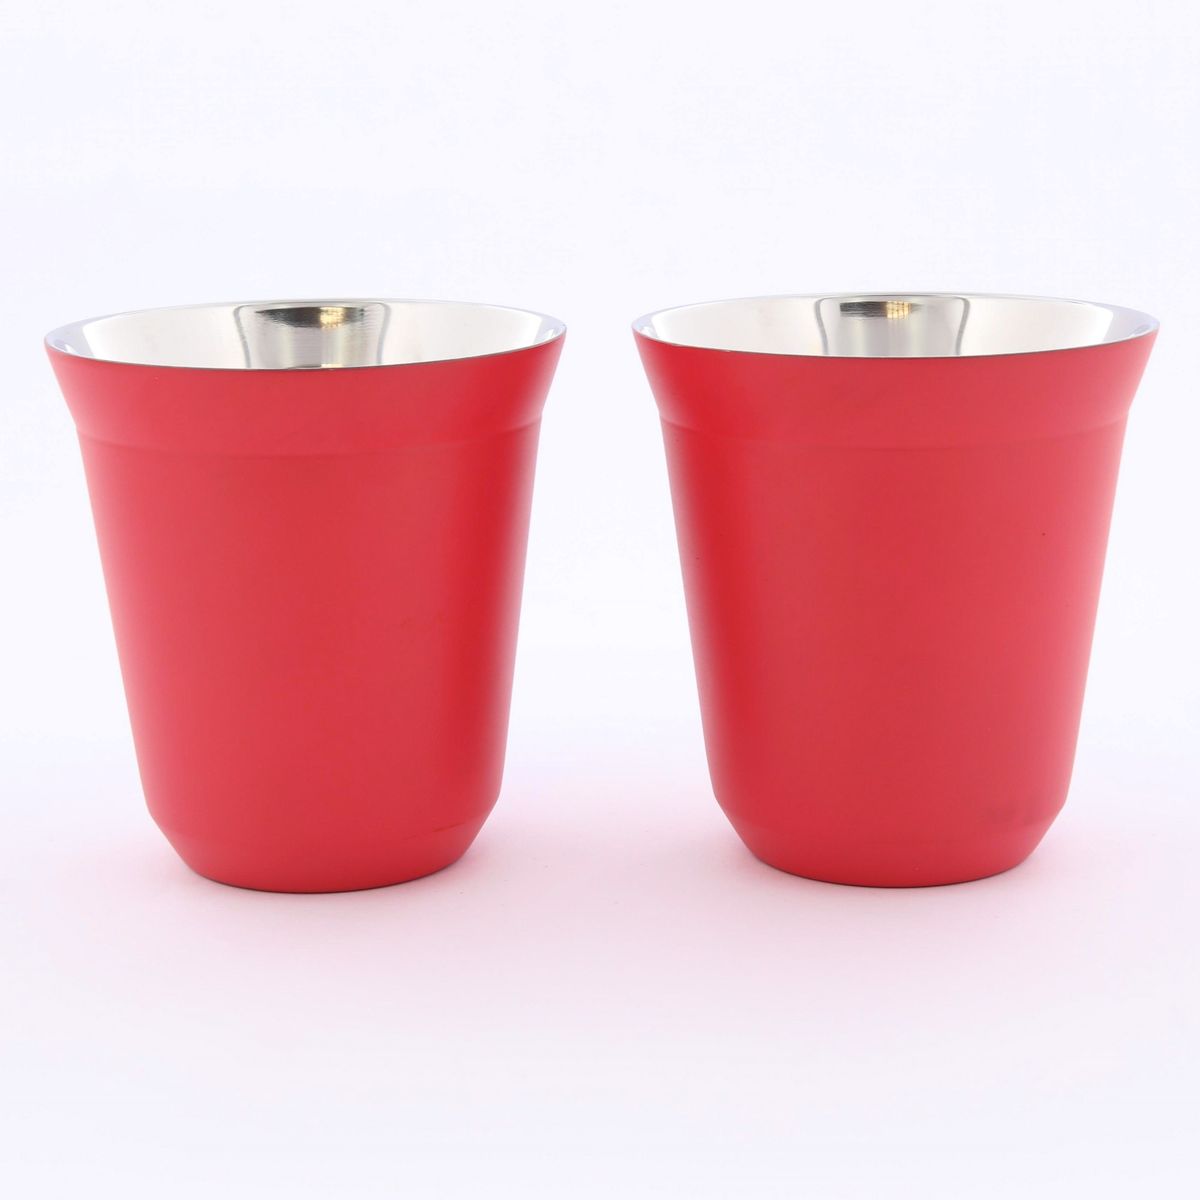 Rovatti Pola Stainless Steel Cup Red 175ml